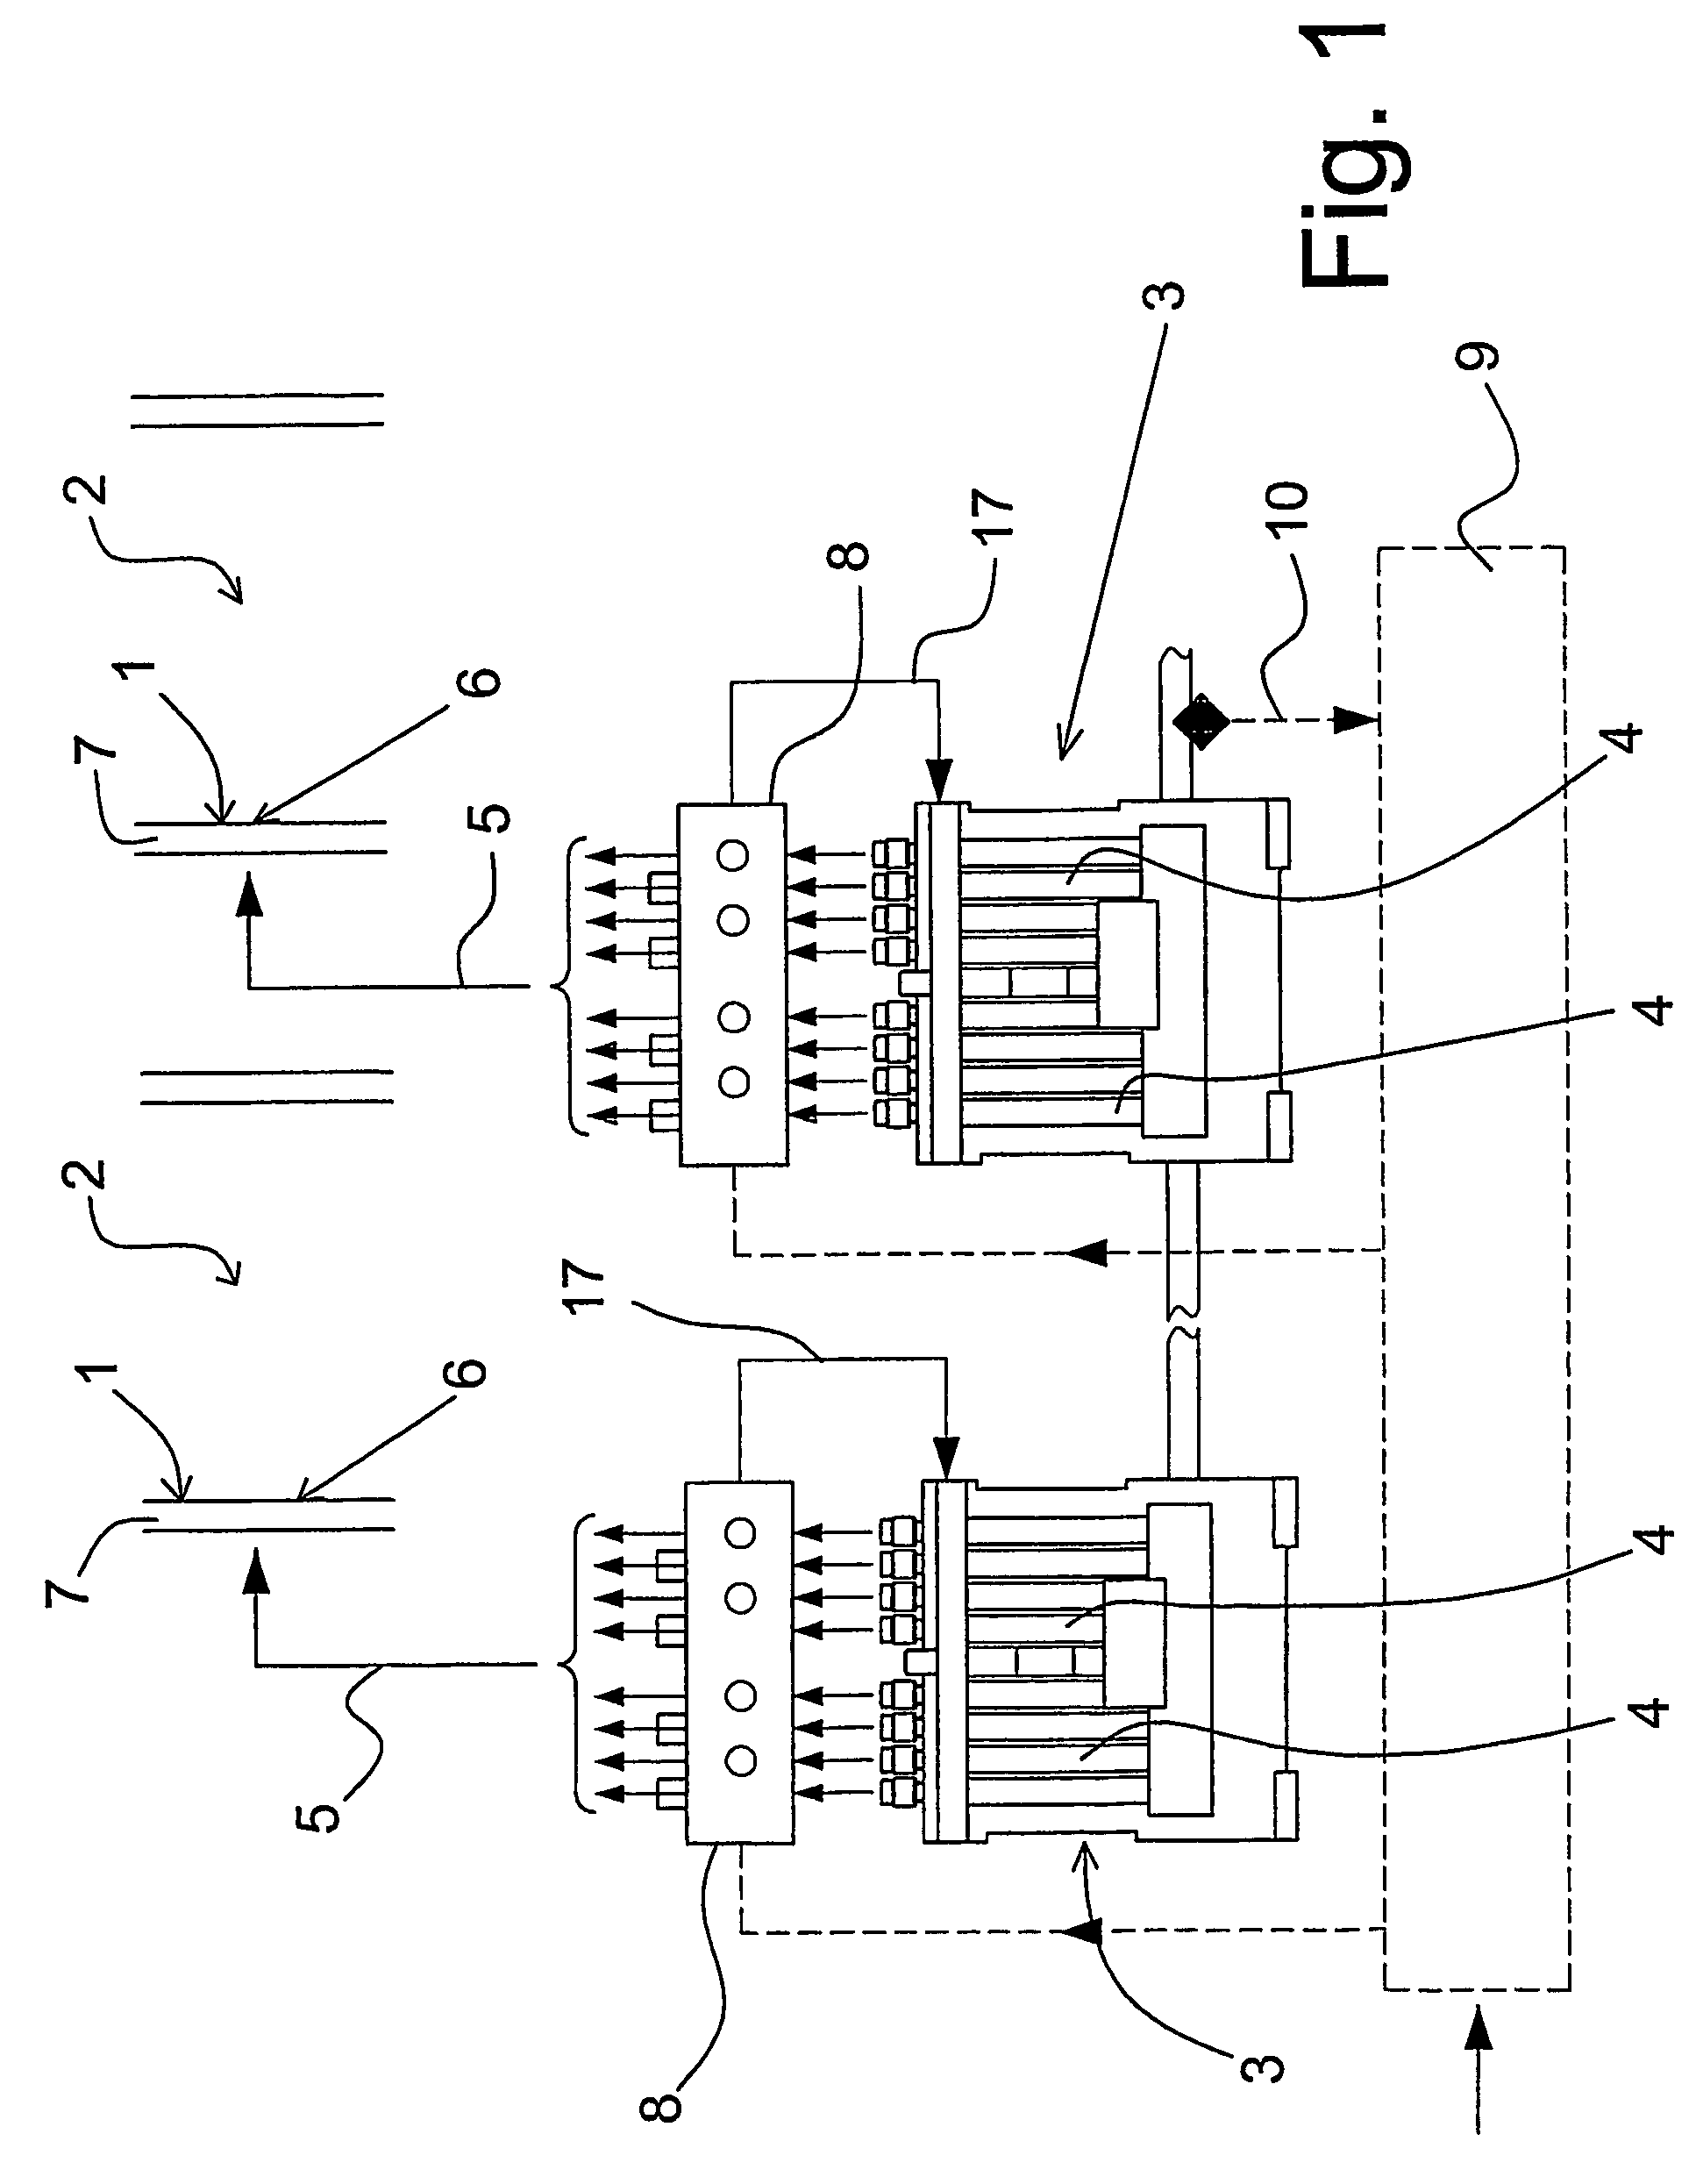 Method and apparatus for lubricating cylinder surface in large diesel engines